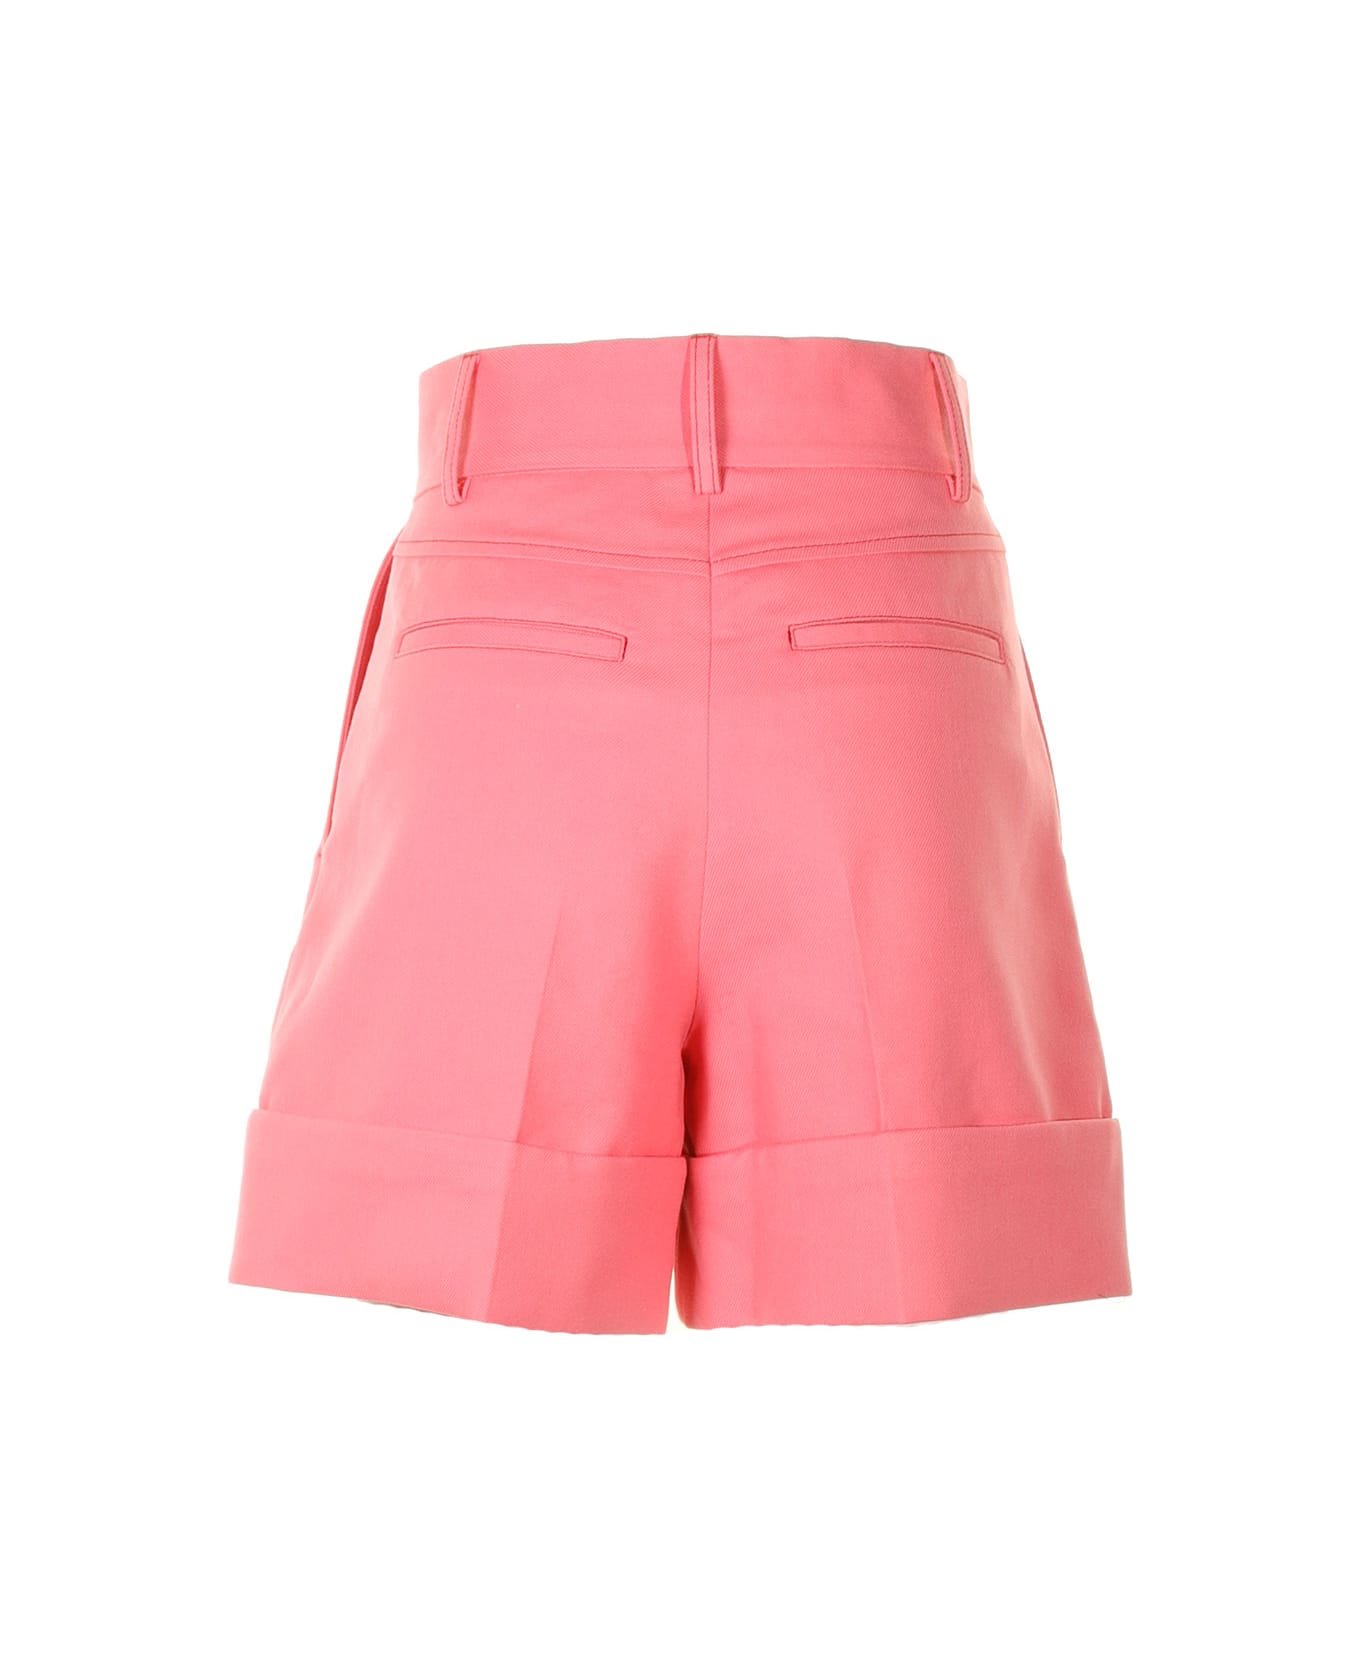 See by Chloé Pink High-waisted Shorts - SUNSET PINK